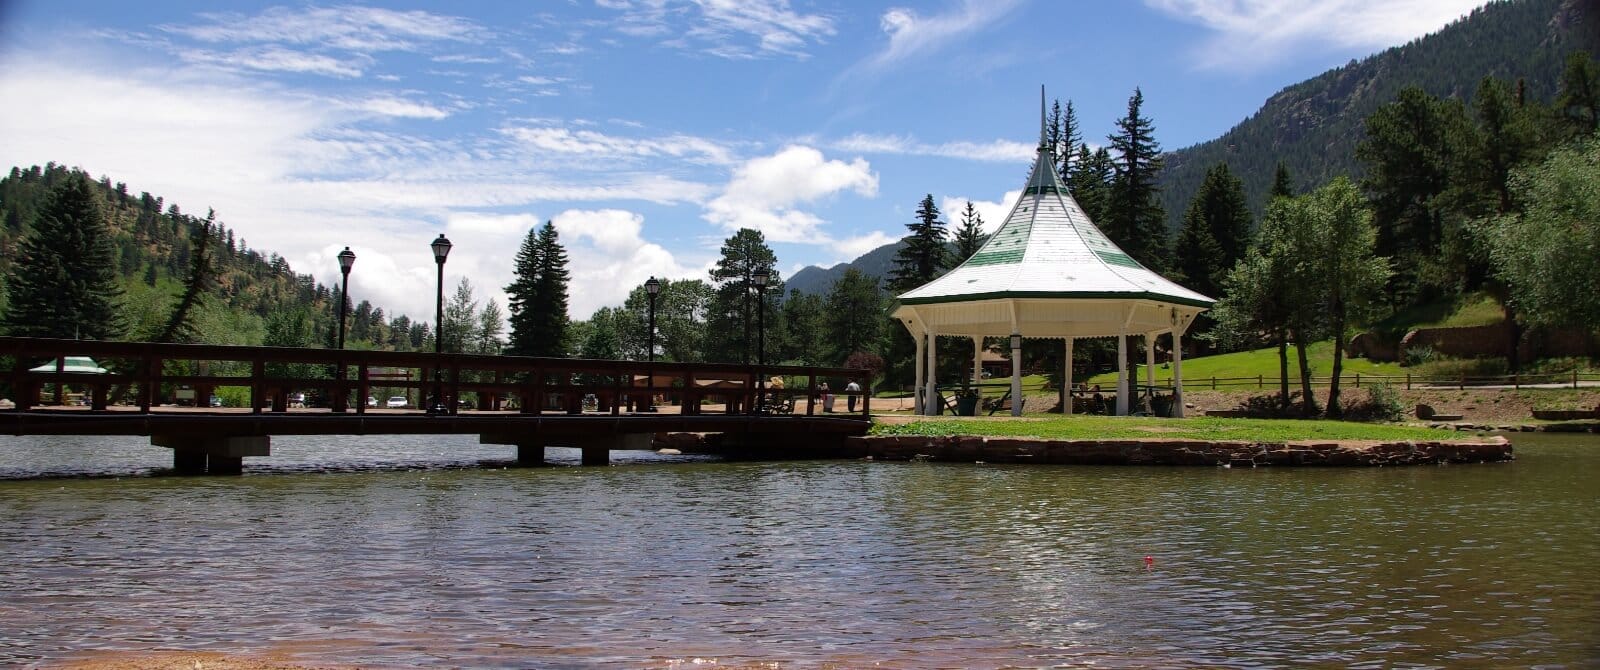 a gazebo on a lake with mountains in the background and blue skies